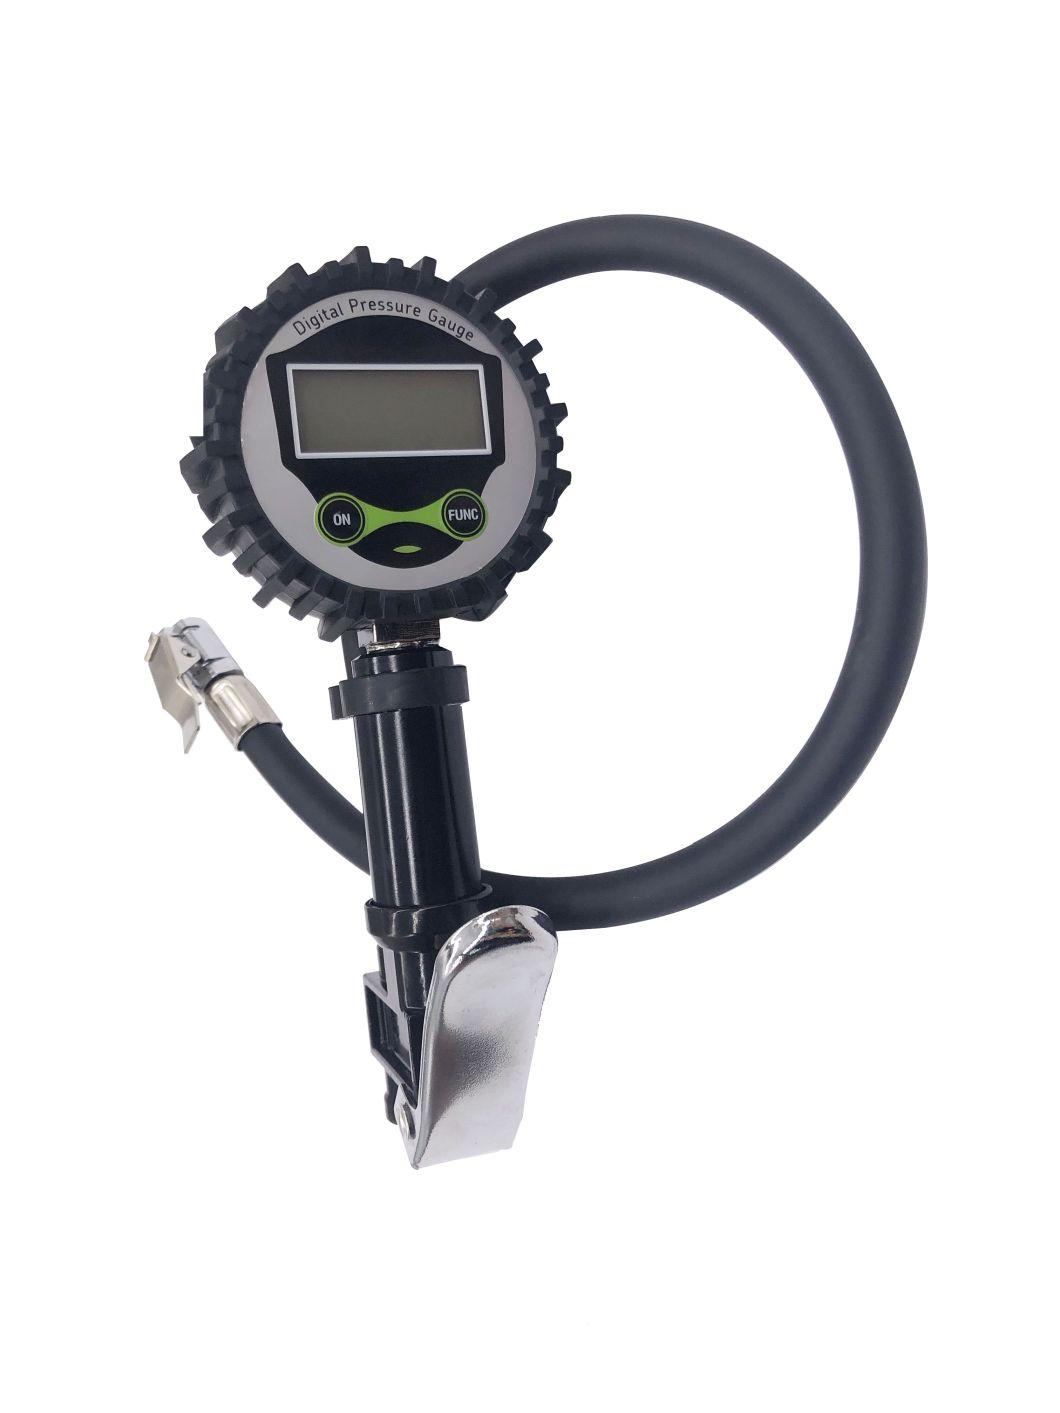 Factory High Quality Strict Standard Digital Tire Pressure Gauge with Rubber Pipe